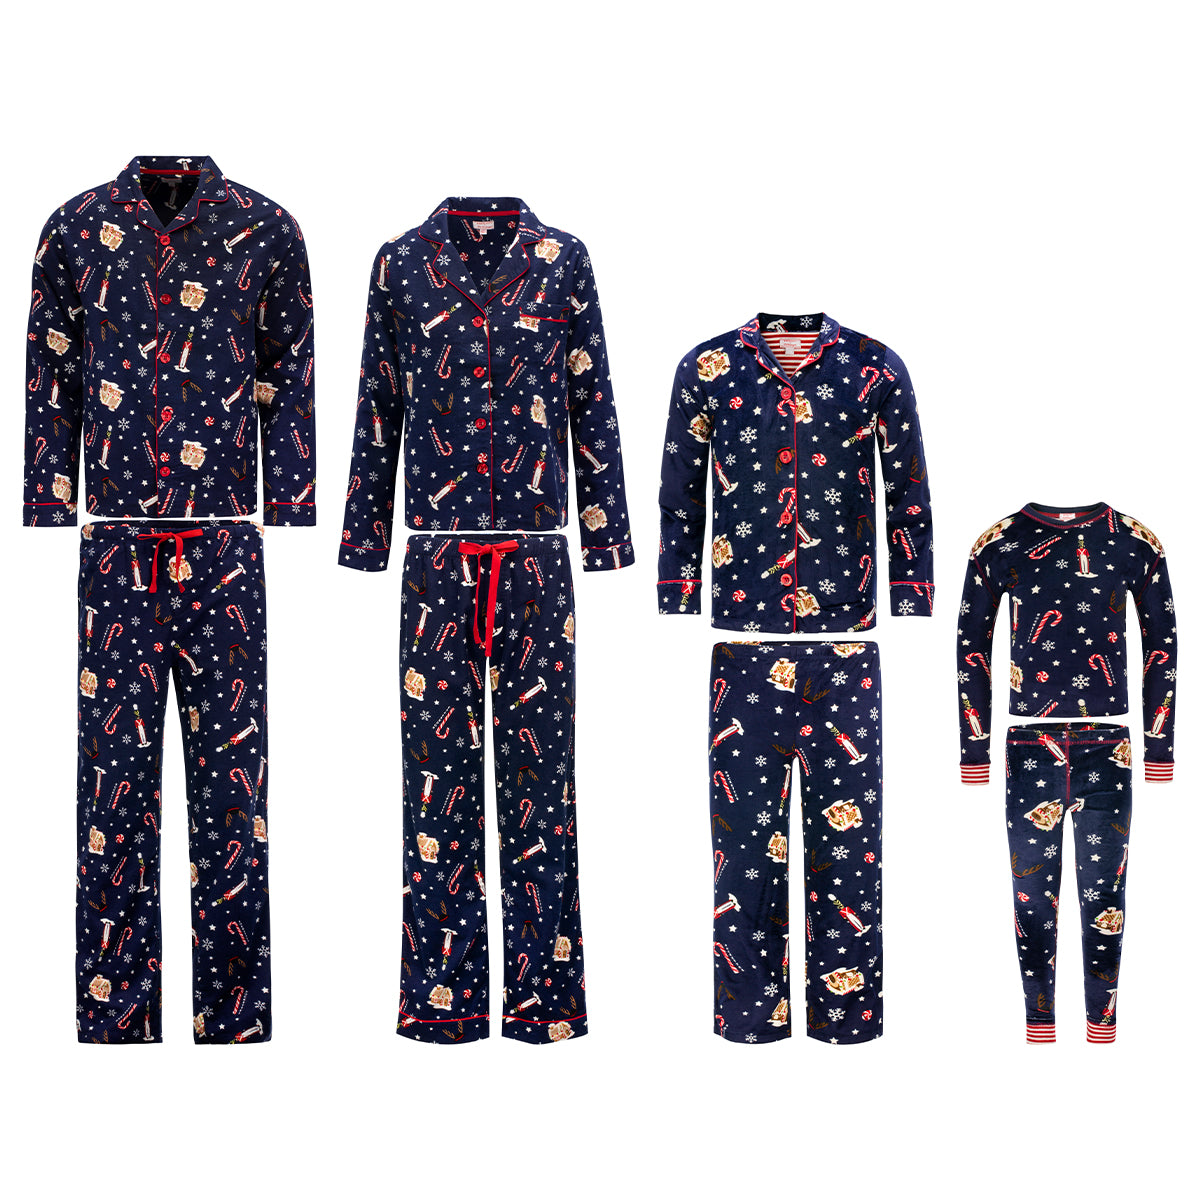 Blue Christmas pajama set for families with snowy print, candy-cane patterns and toy soldier design